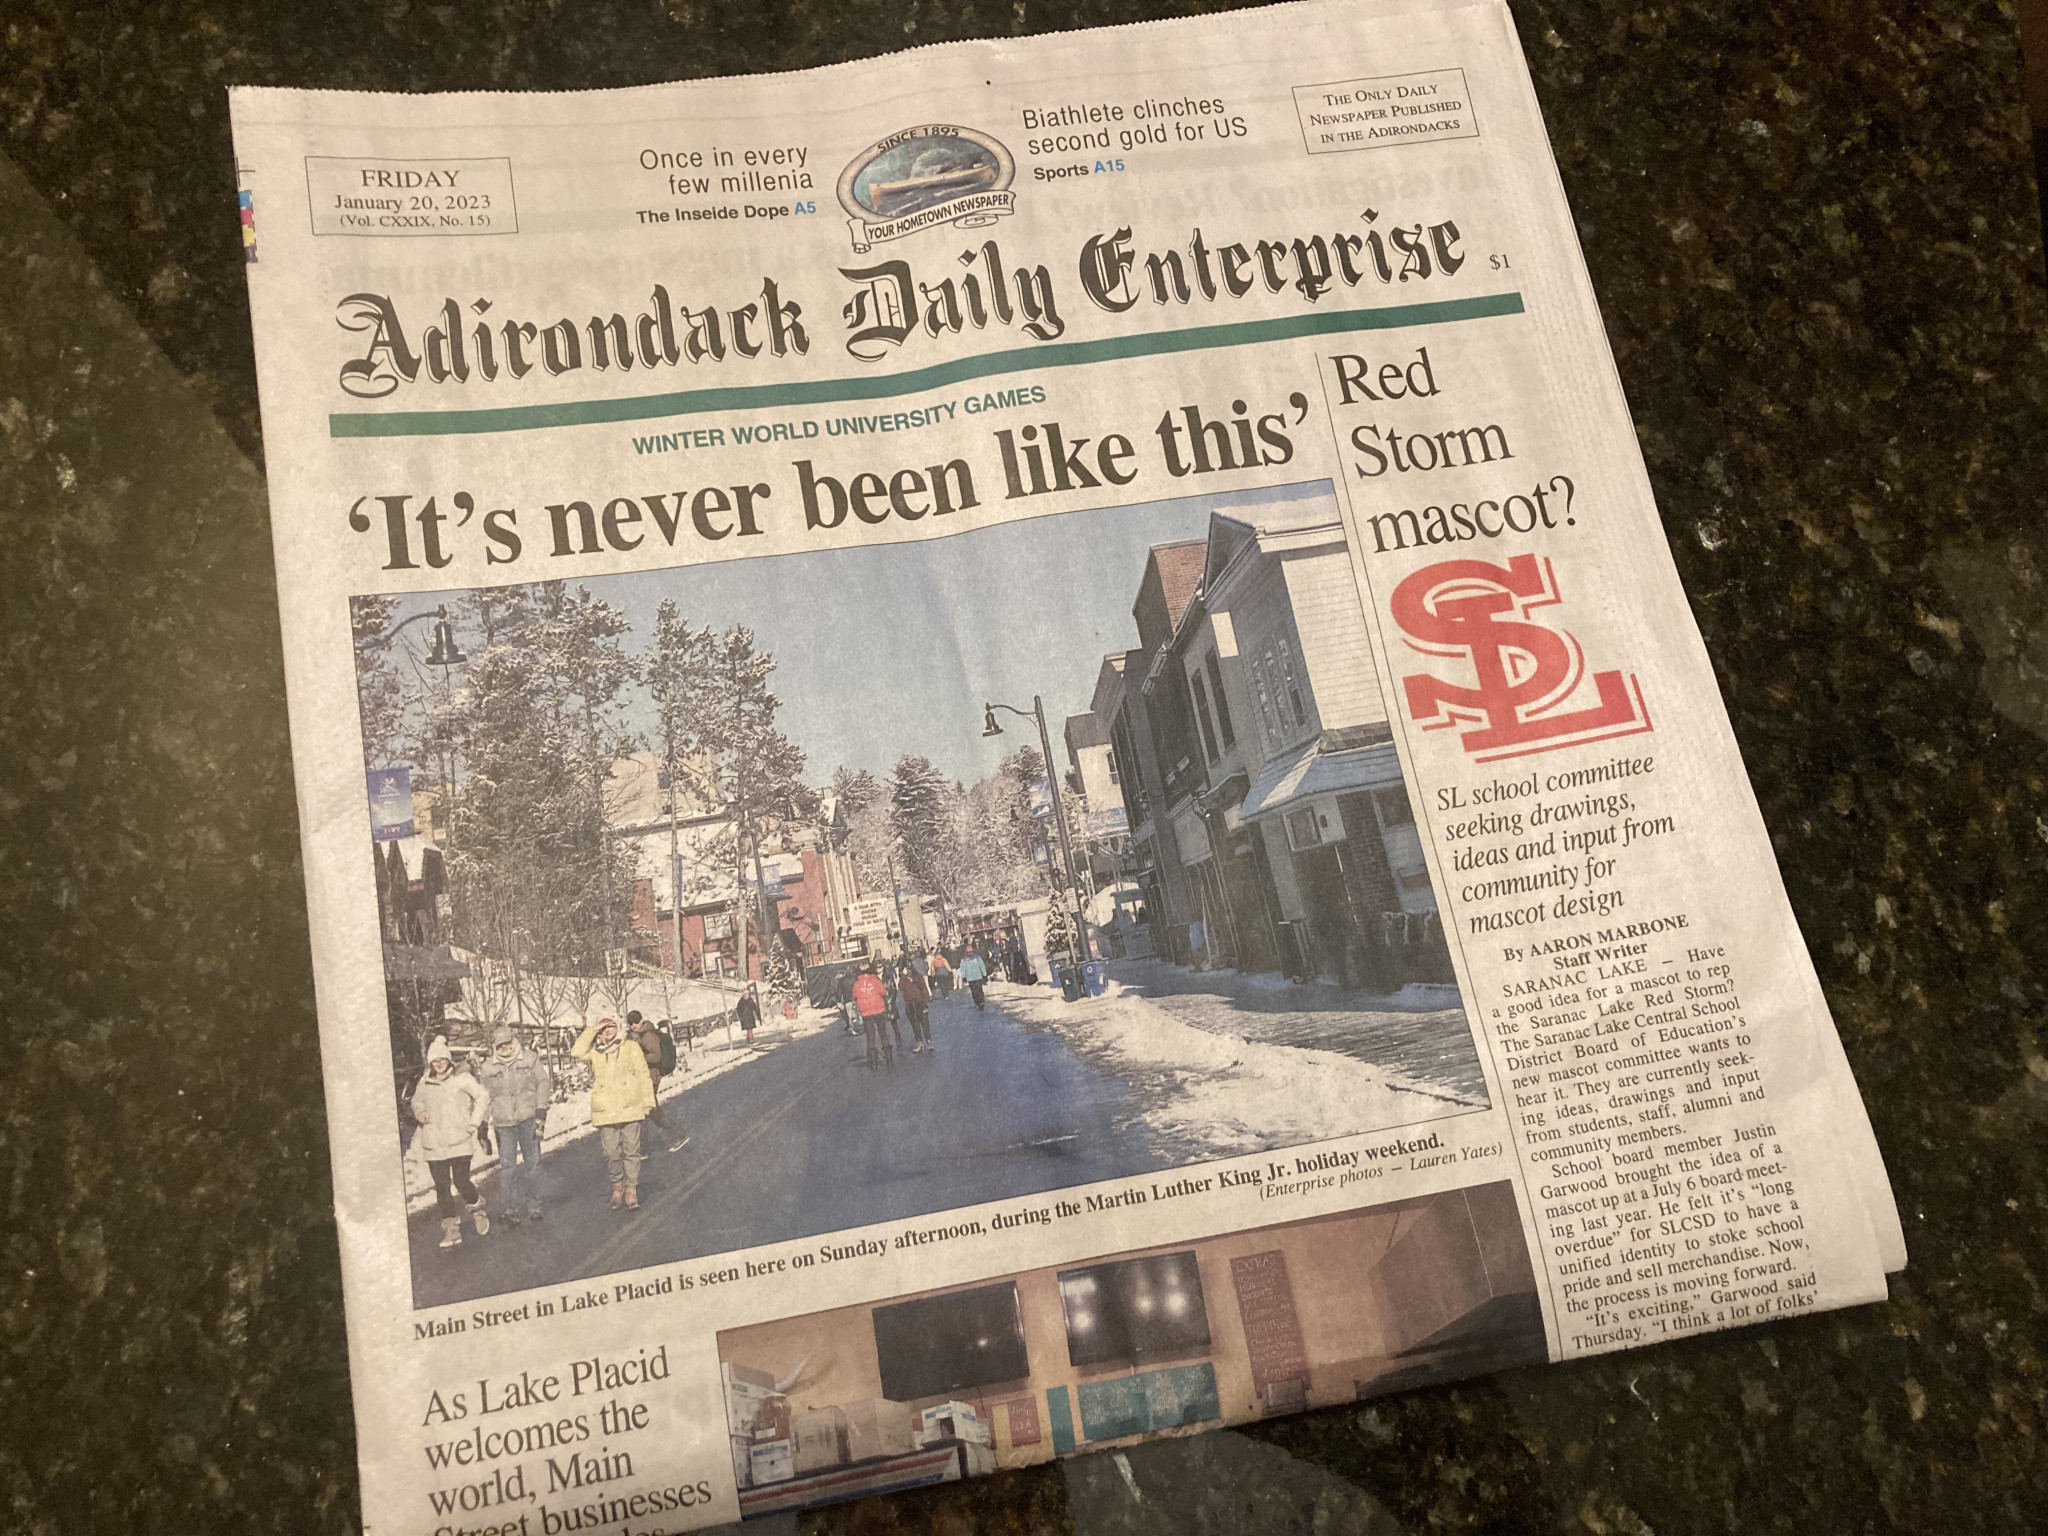 A story from the Adirondack Daily Enterprise reported on how business owners struggled to cash in on the staging of the FISU Winter World University Games ©ITG